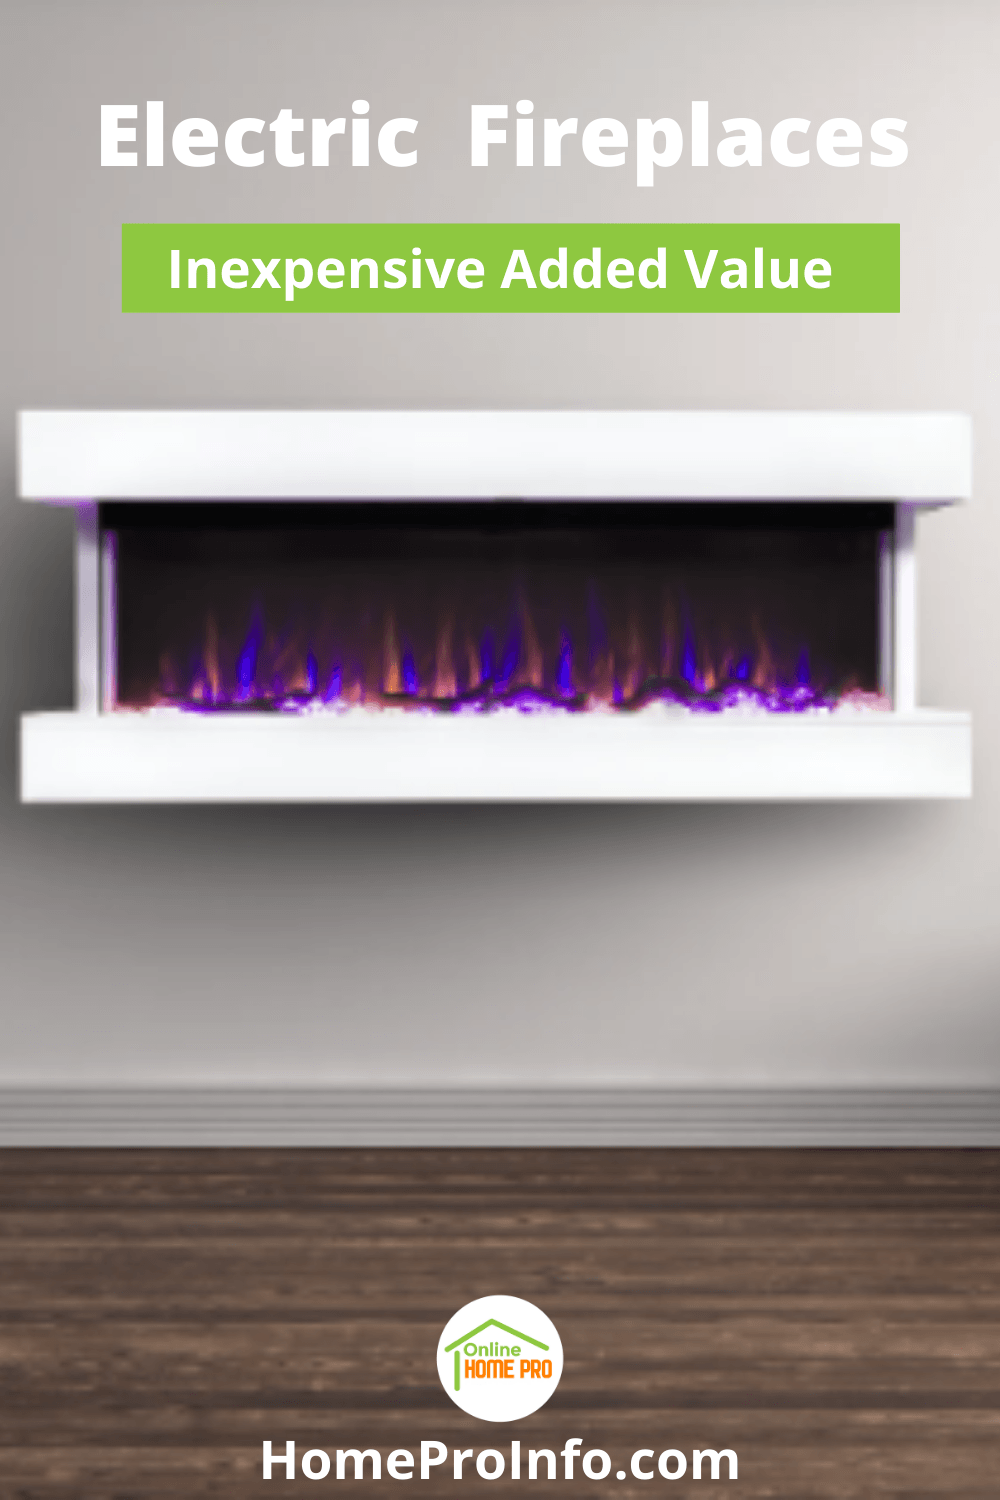 electric fireplaces for inexpensive added value